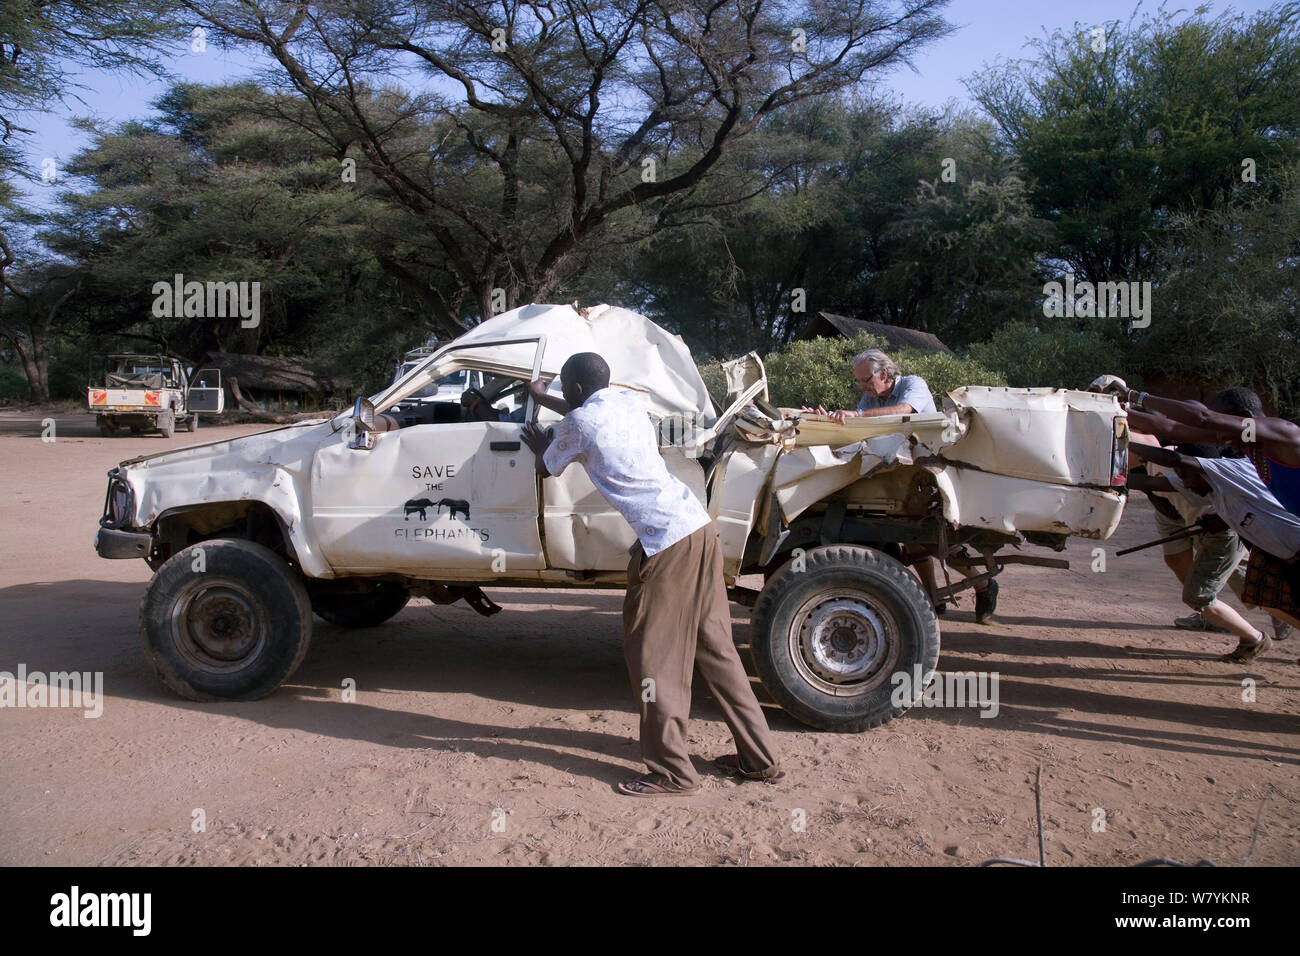 Former Save the Elephants research vehicle destroyed by bull elephant in Samburu National Reserve, Kenya. Save the Elephants workers including Iain Douglas-Hamilton trying to push start the LandCrusier. Model Released. Stock Photo